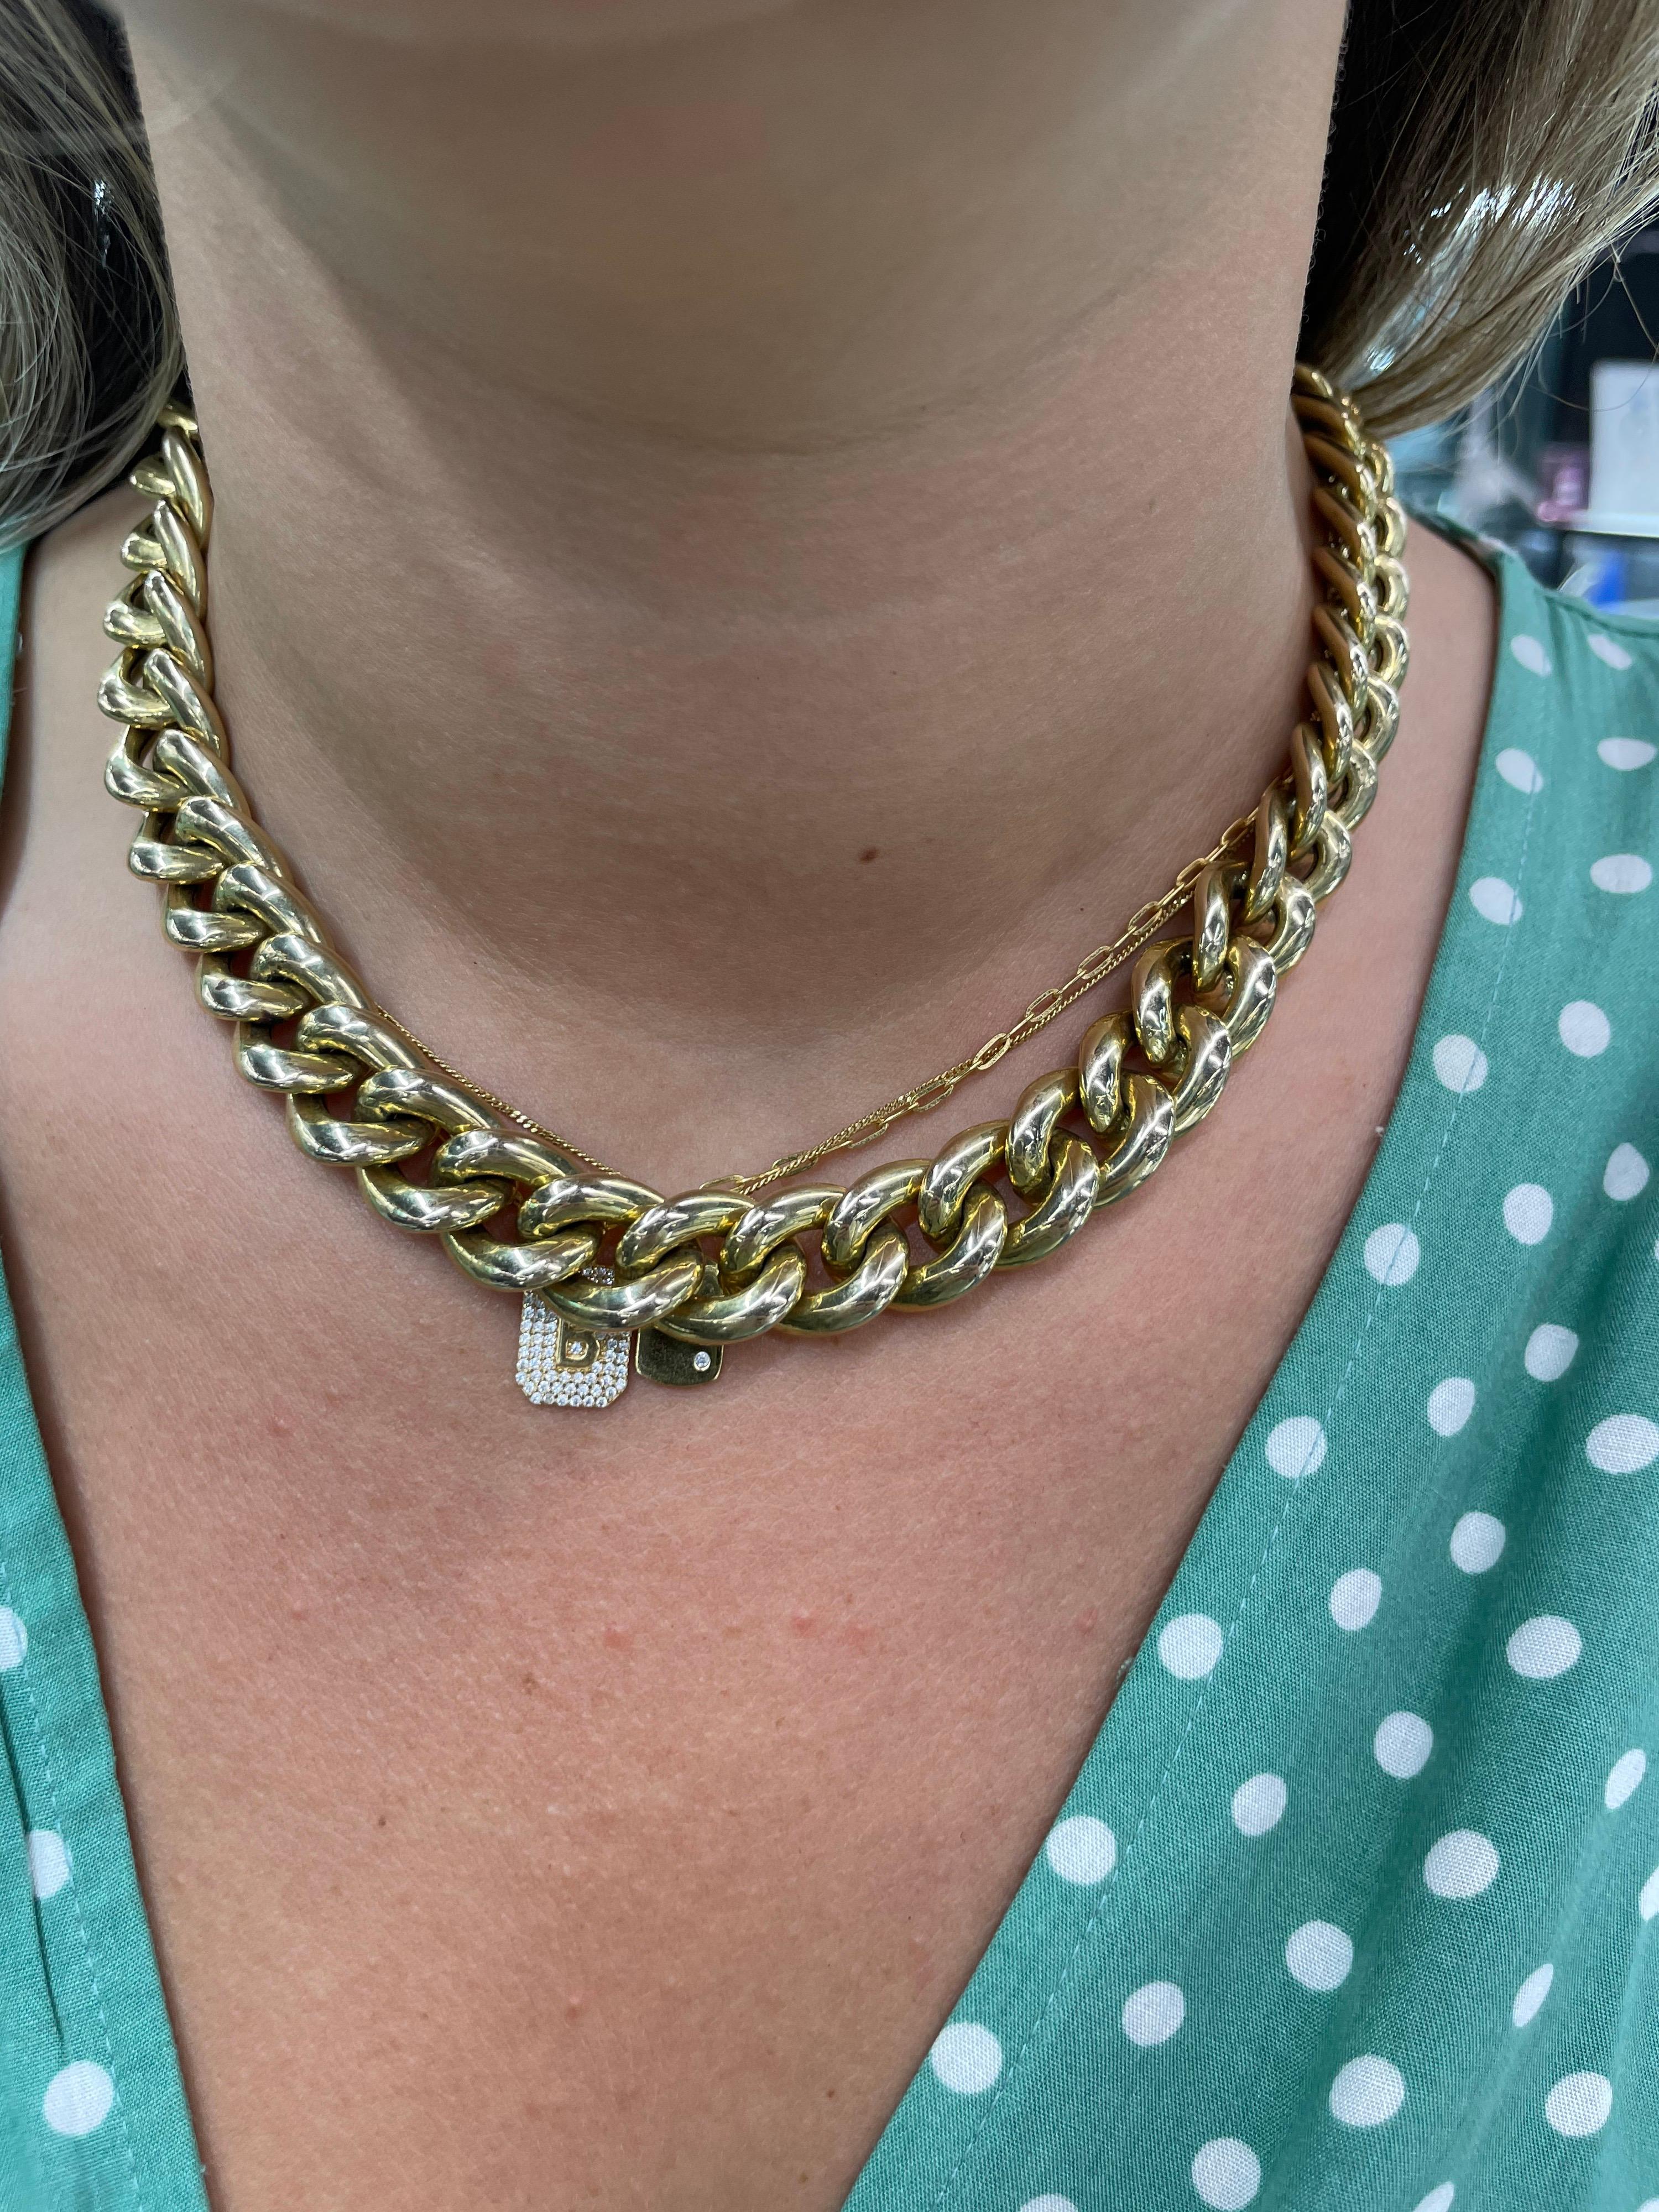 14 Karat yellow gold necklace featuring 44 high polish links weighing 47.6 grams, 17.5 inches long.
Matching bracelet is also available and can be extended onto the necklace to make long. 
Bracelet is 8 inches long.
Price for necklace only. 